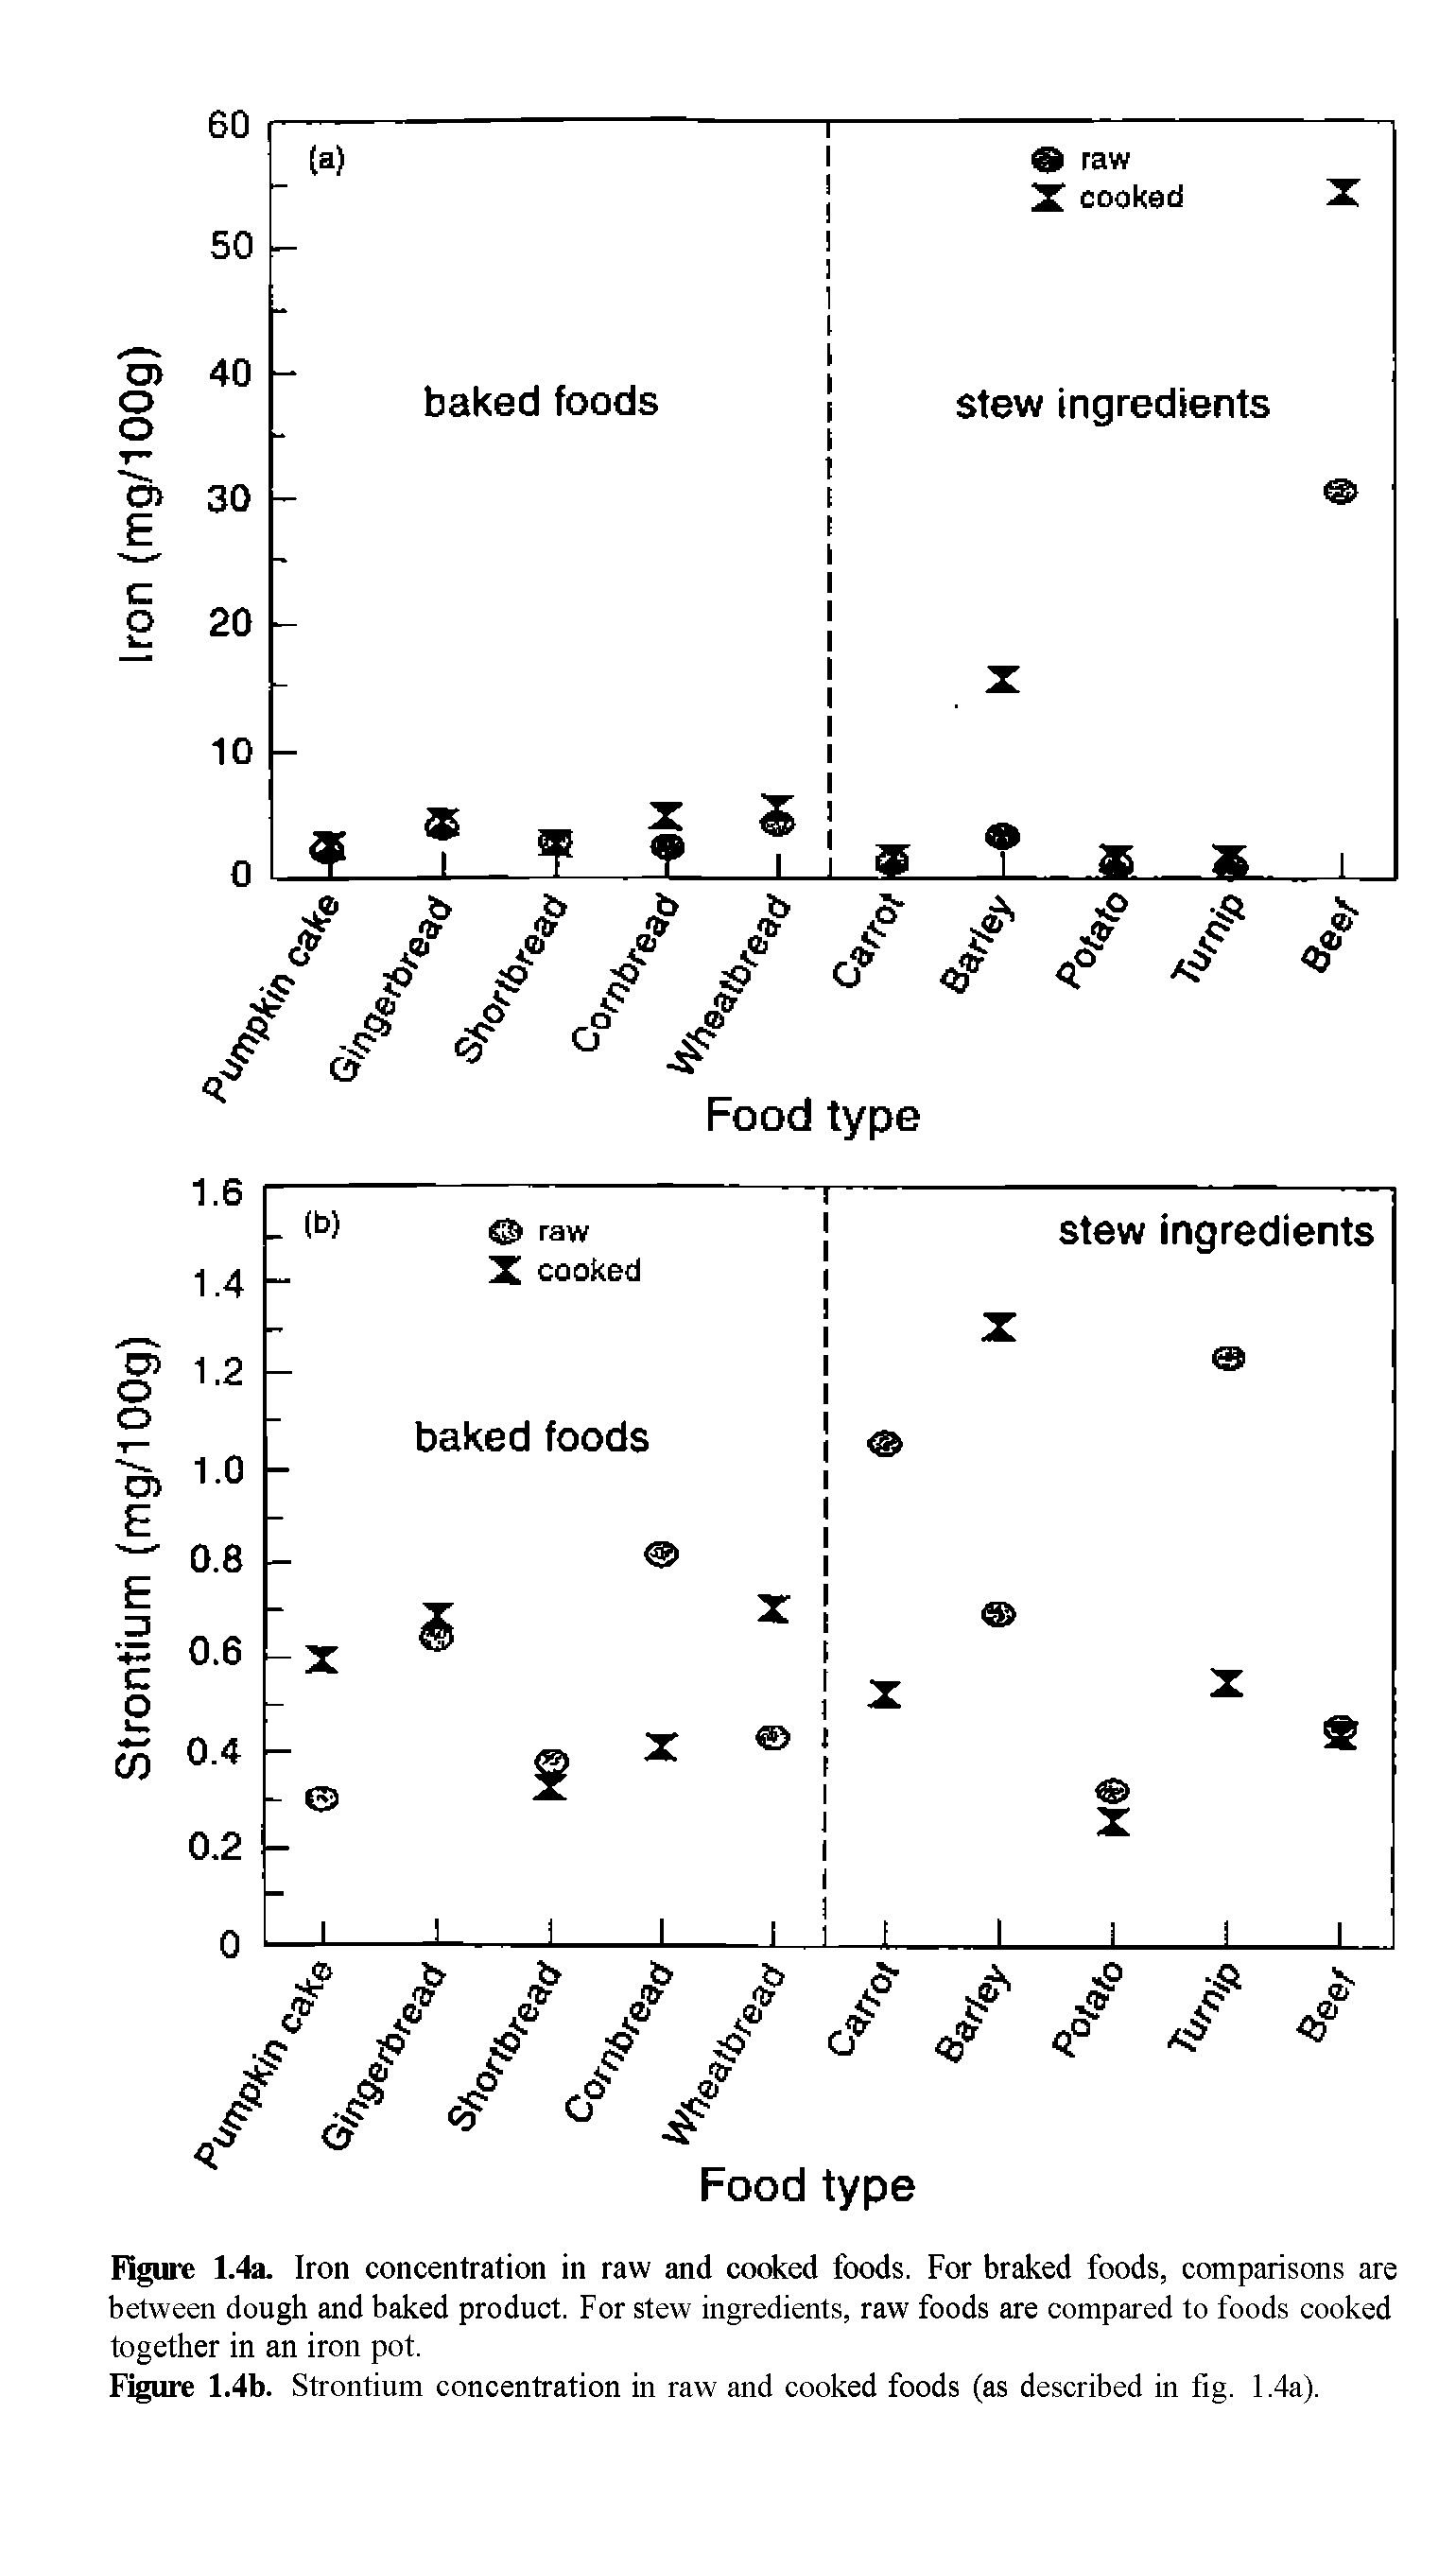 Figure 1.4b. Strontium concentration in raw and cooked foods (as described in fig. 1.4a).